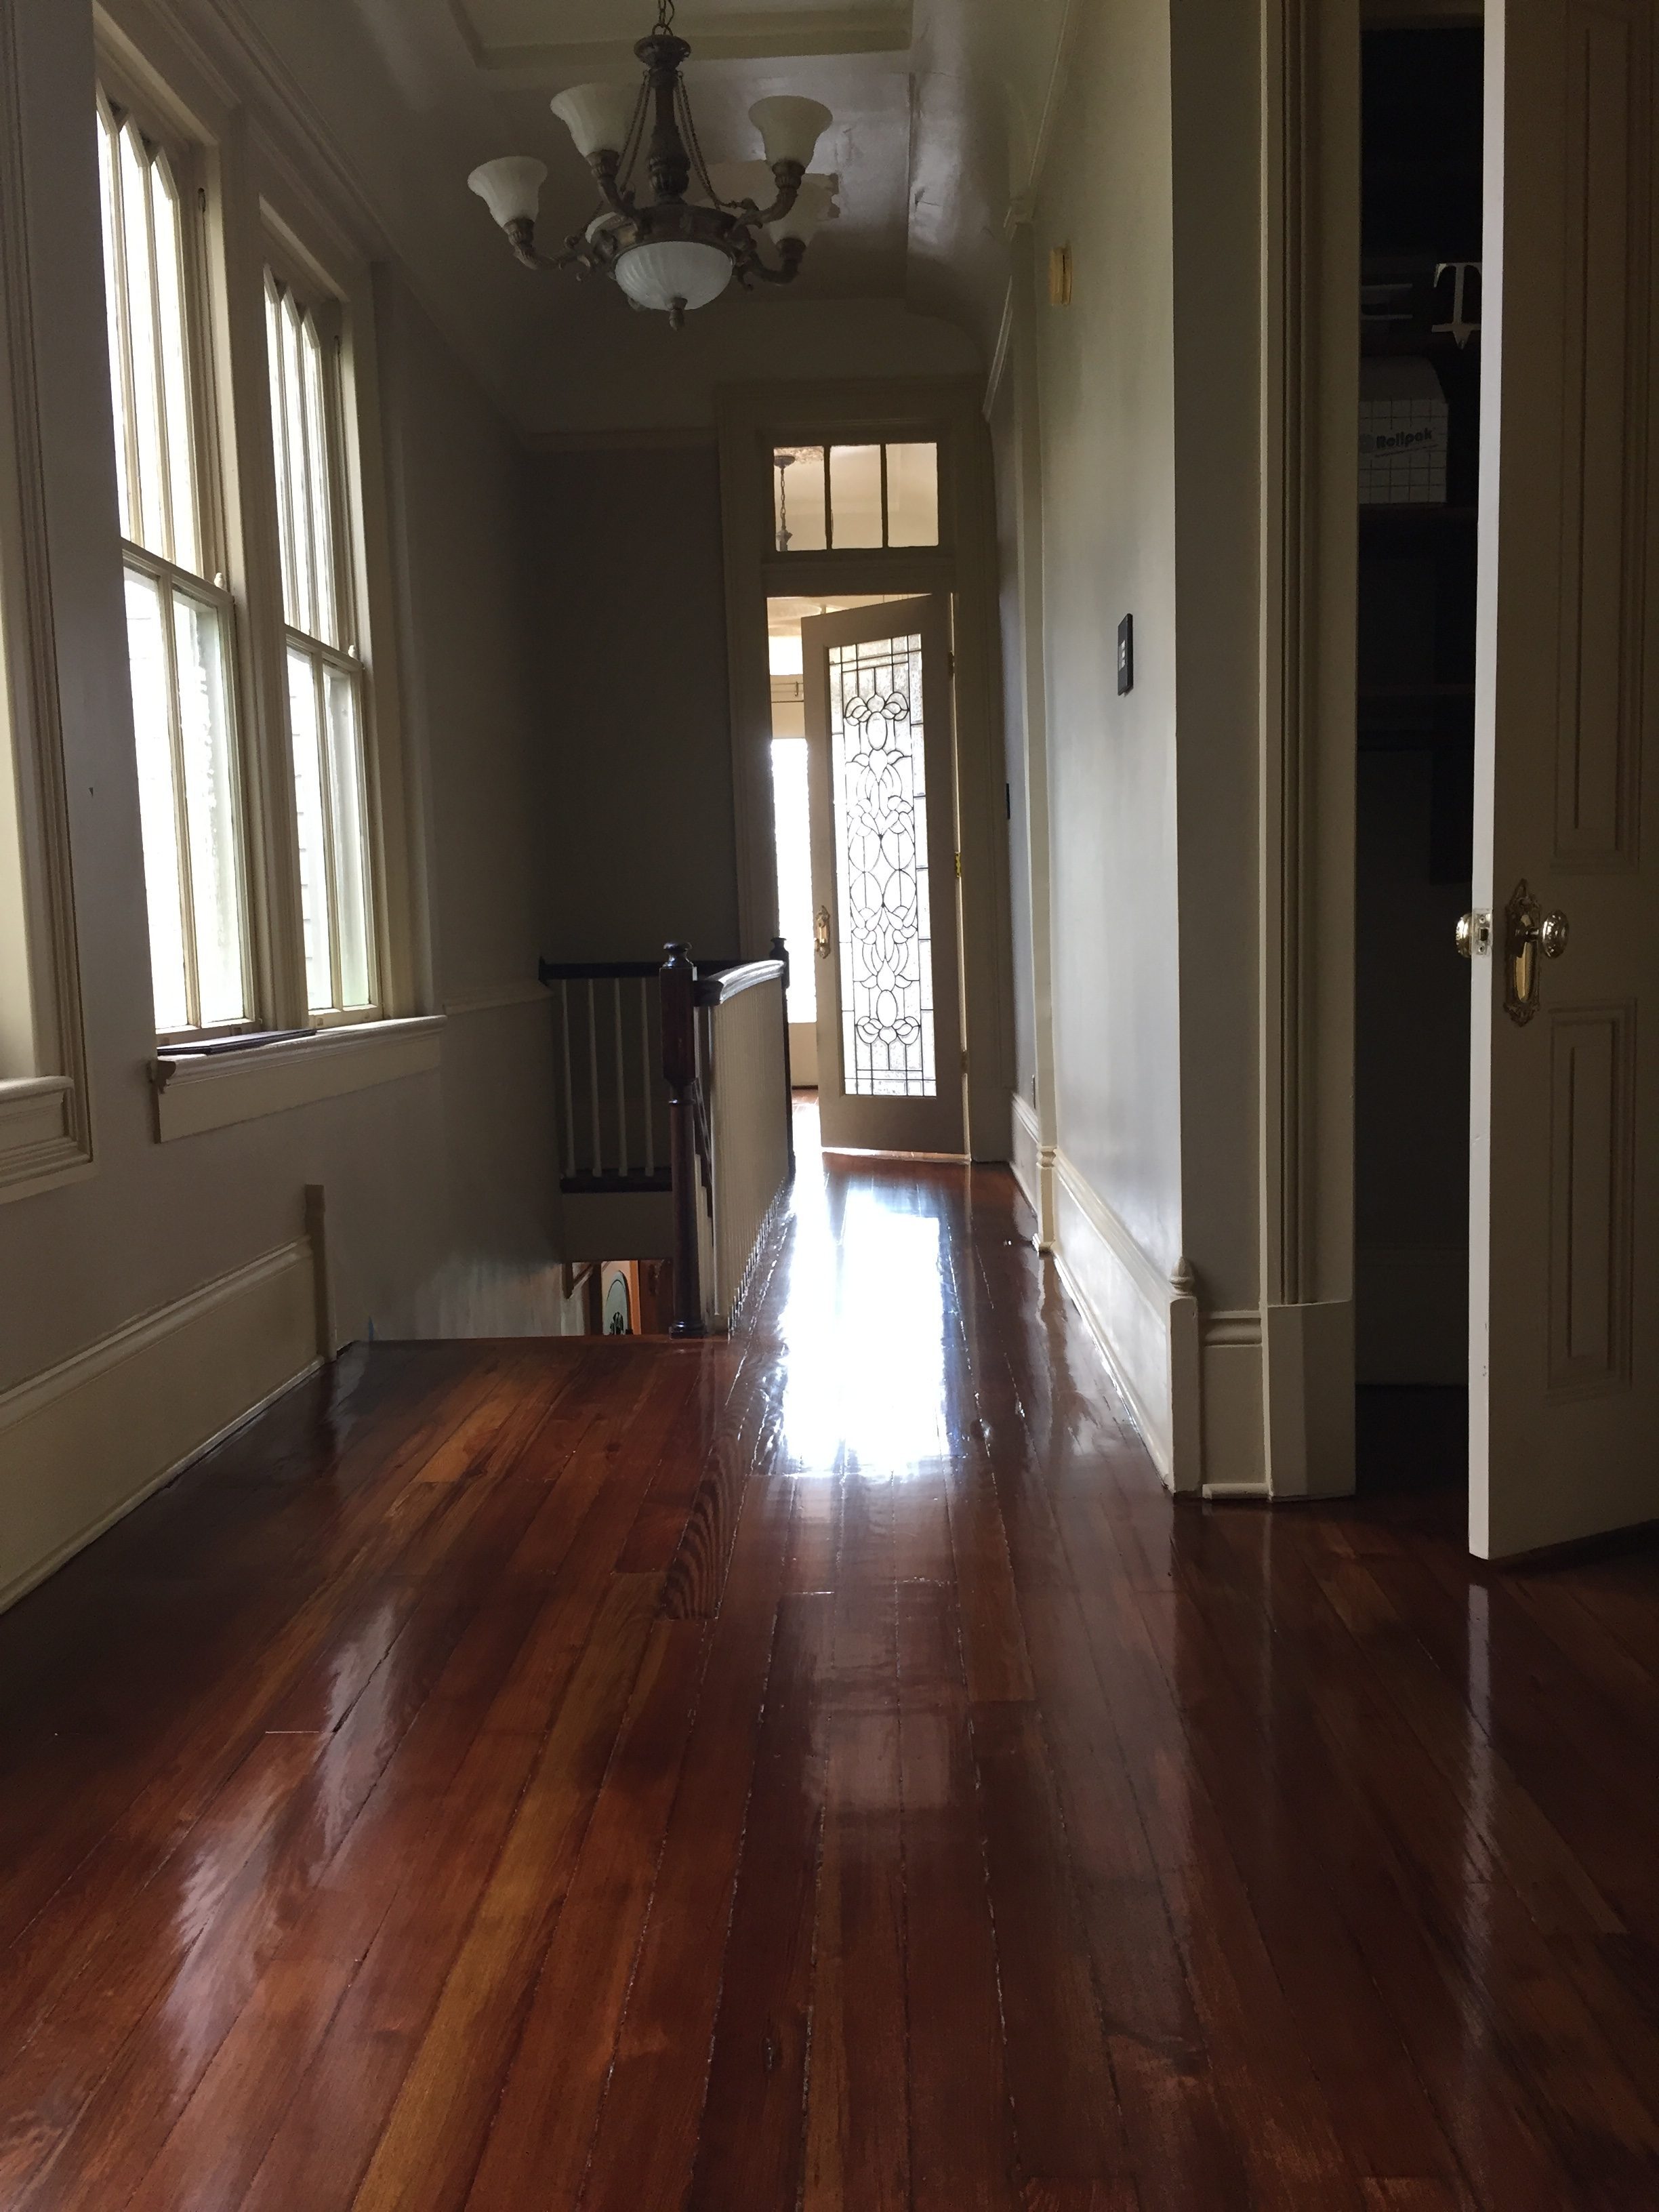 This is a hallway with a staircase of refinished glossy pine floors.